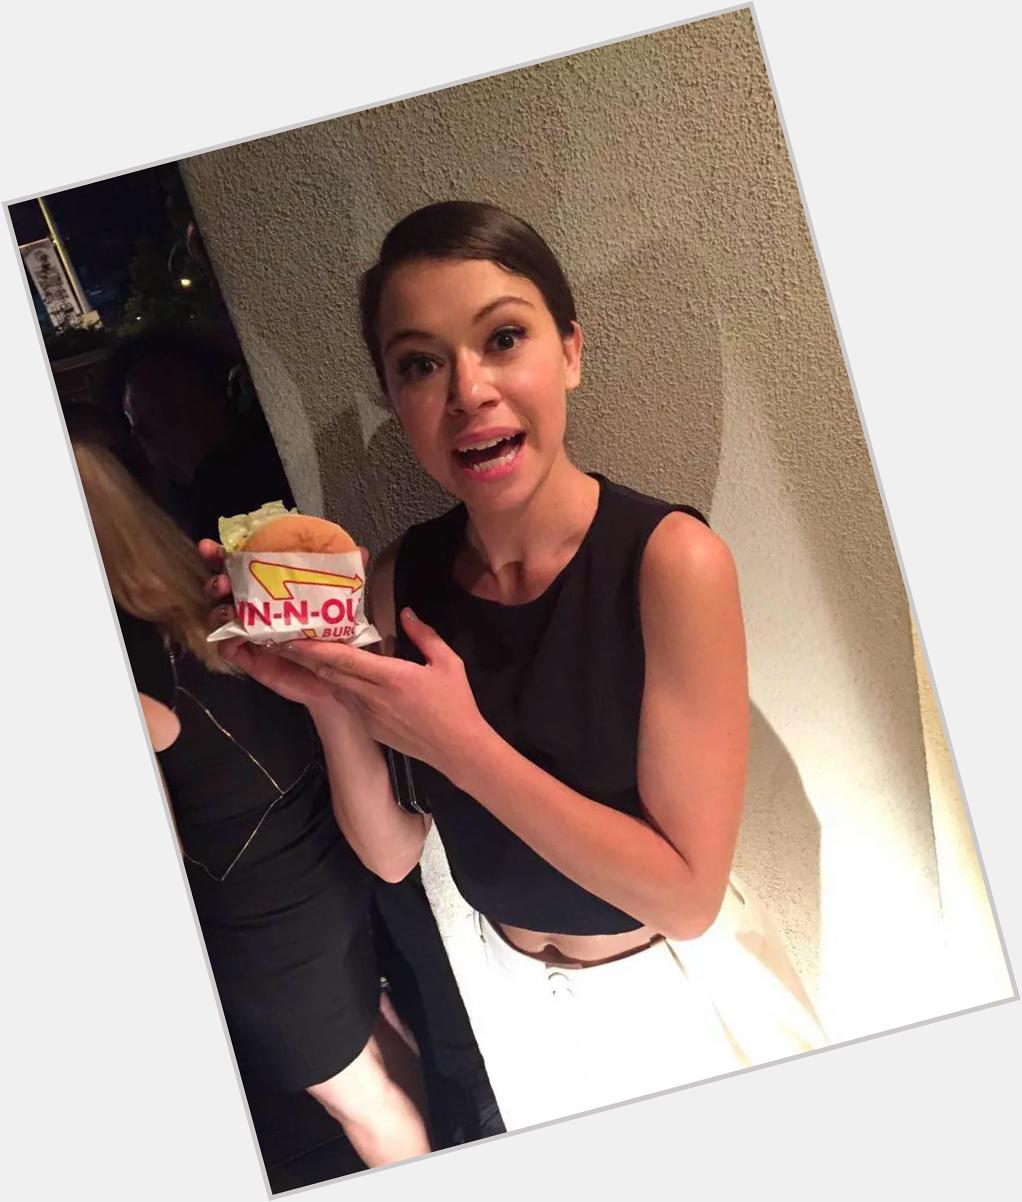 Tatiana Maslany experiences IN-N-OUT & turns 30 all in 1 week. Now THAT\S a celebration! Happy birthday  